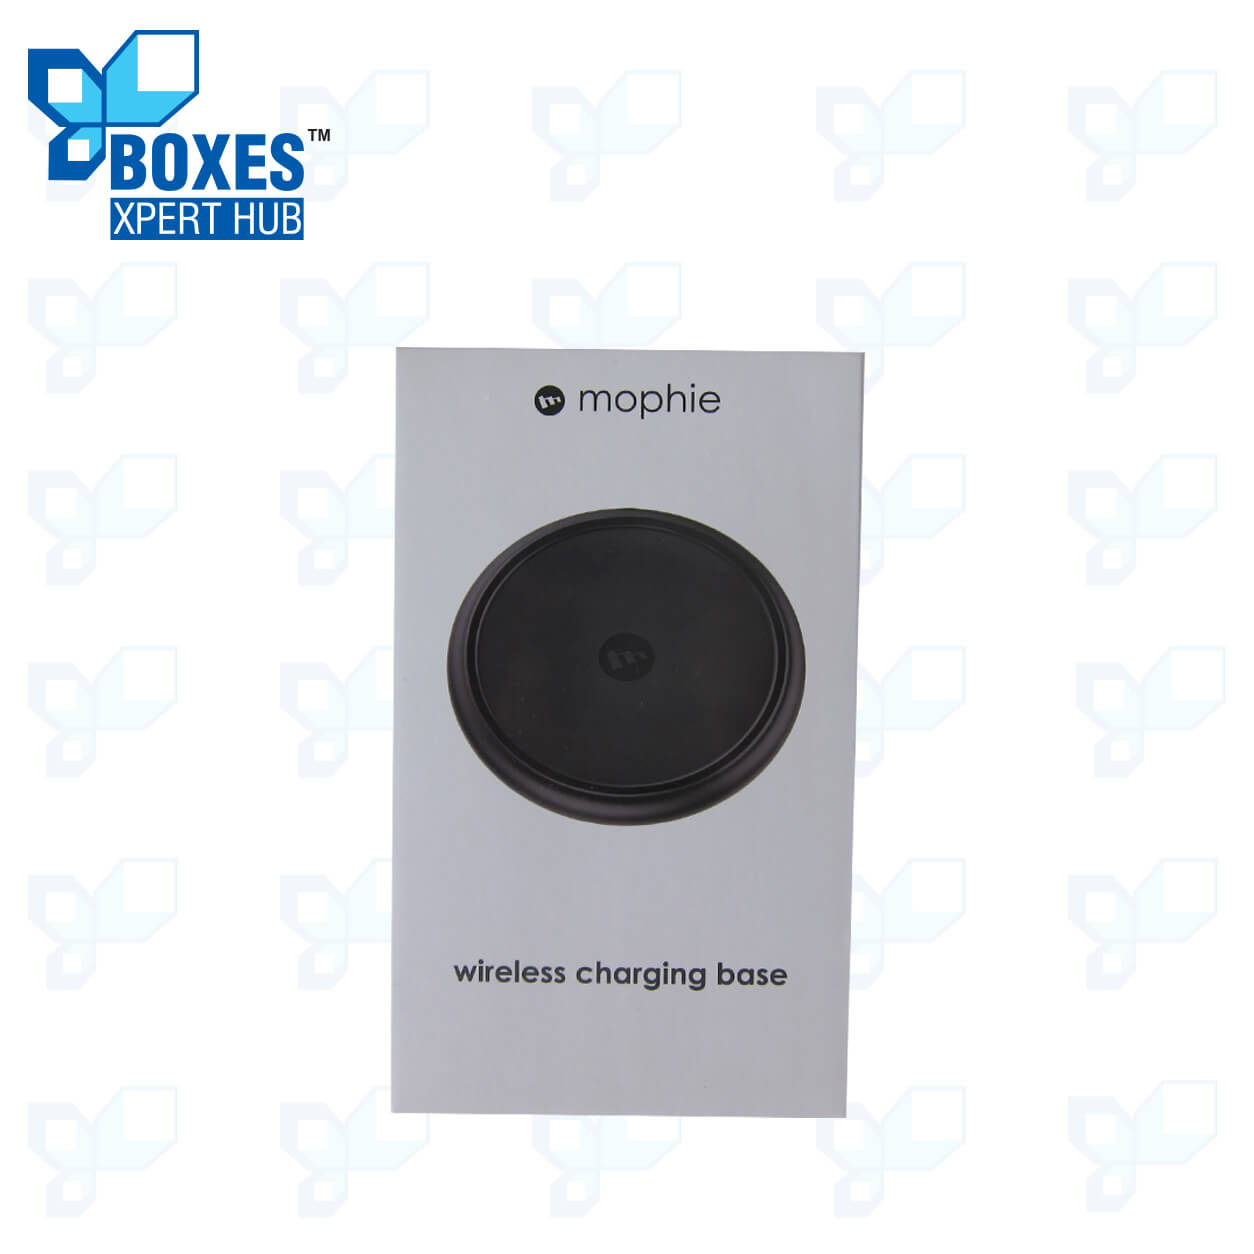 Wireless Charger Boxes